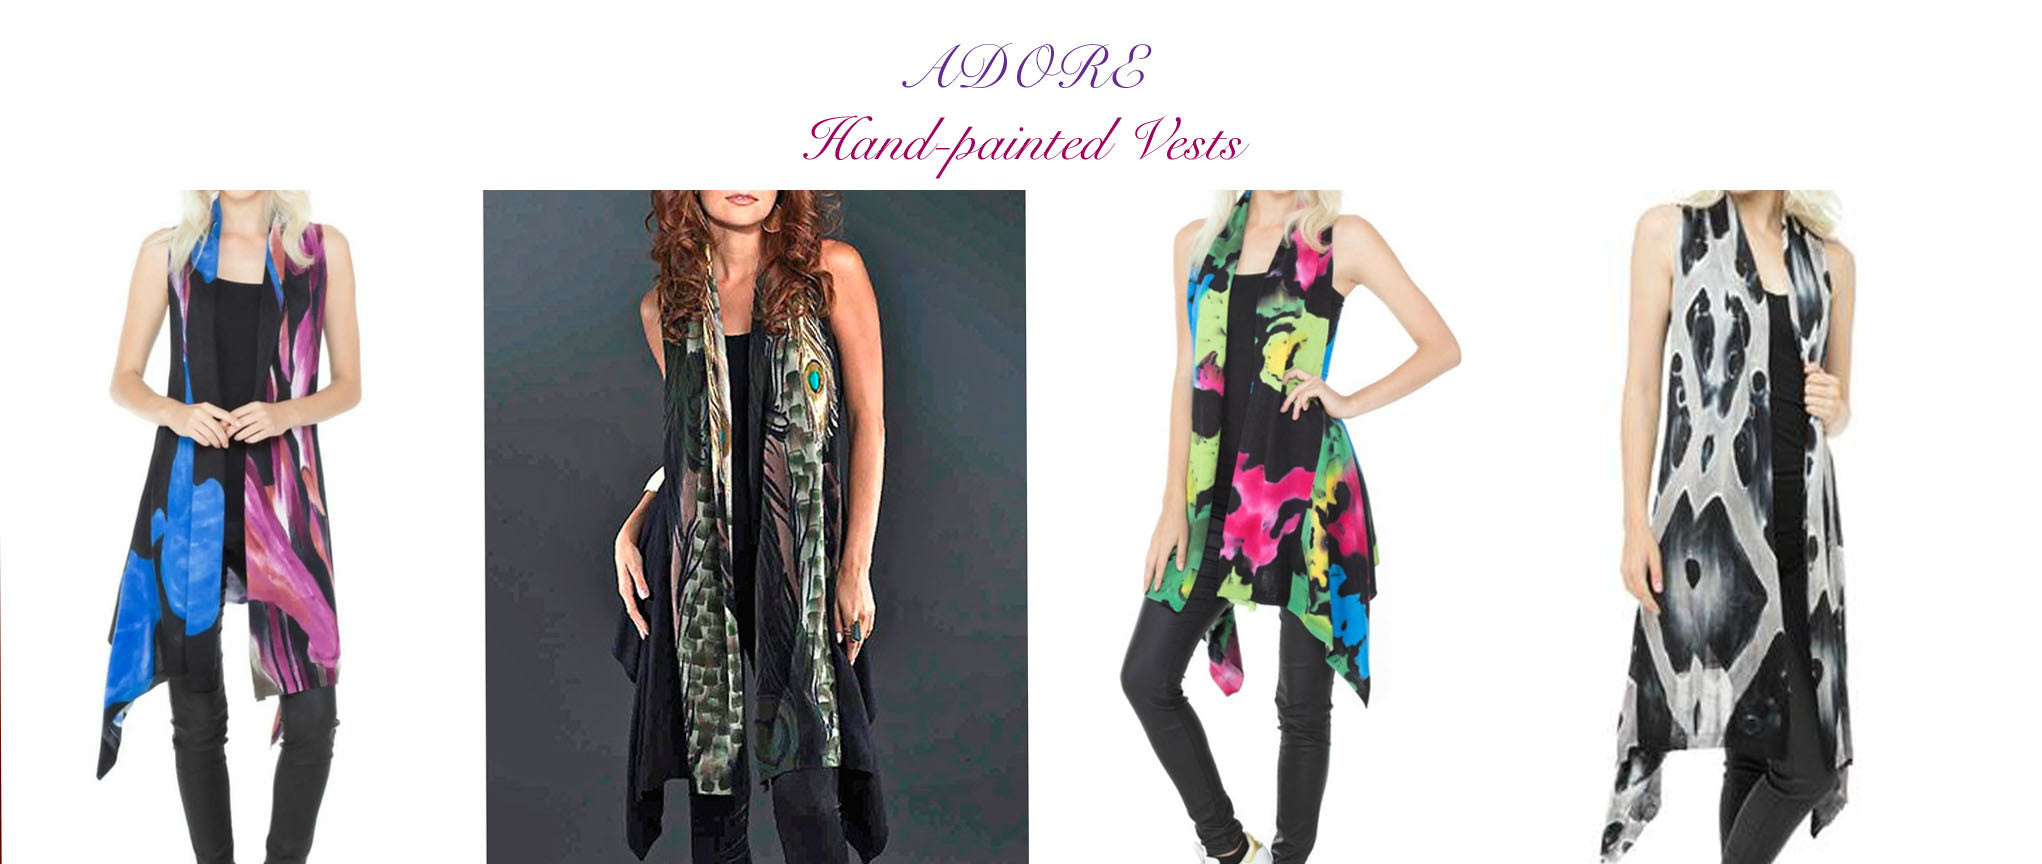 Adore hand-painted vests... Personalize them your way!